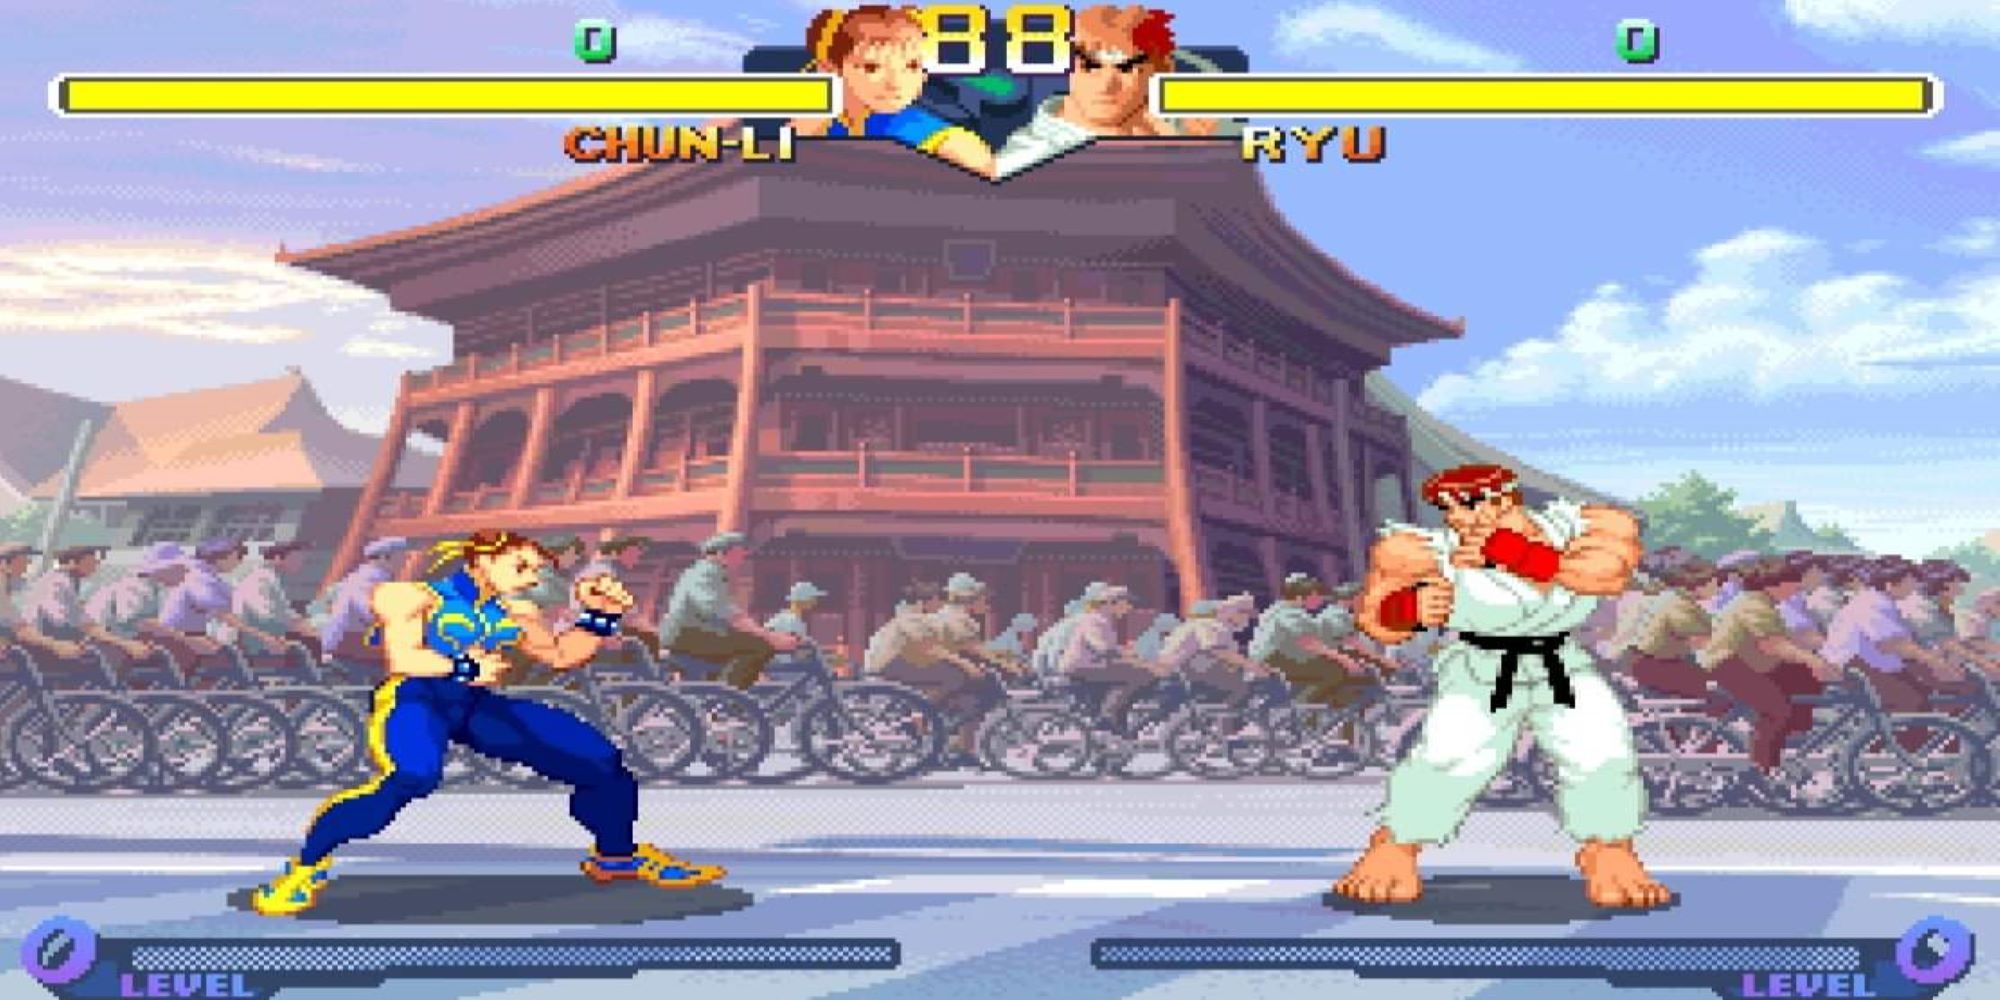 Cyclists pass behind Chun-li and Ryu on a busy street in China in Street Fighter Alpha 2.